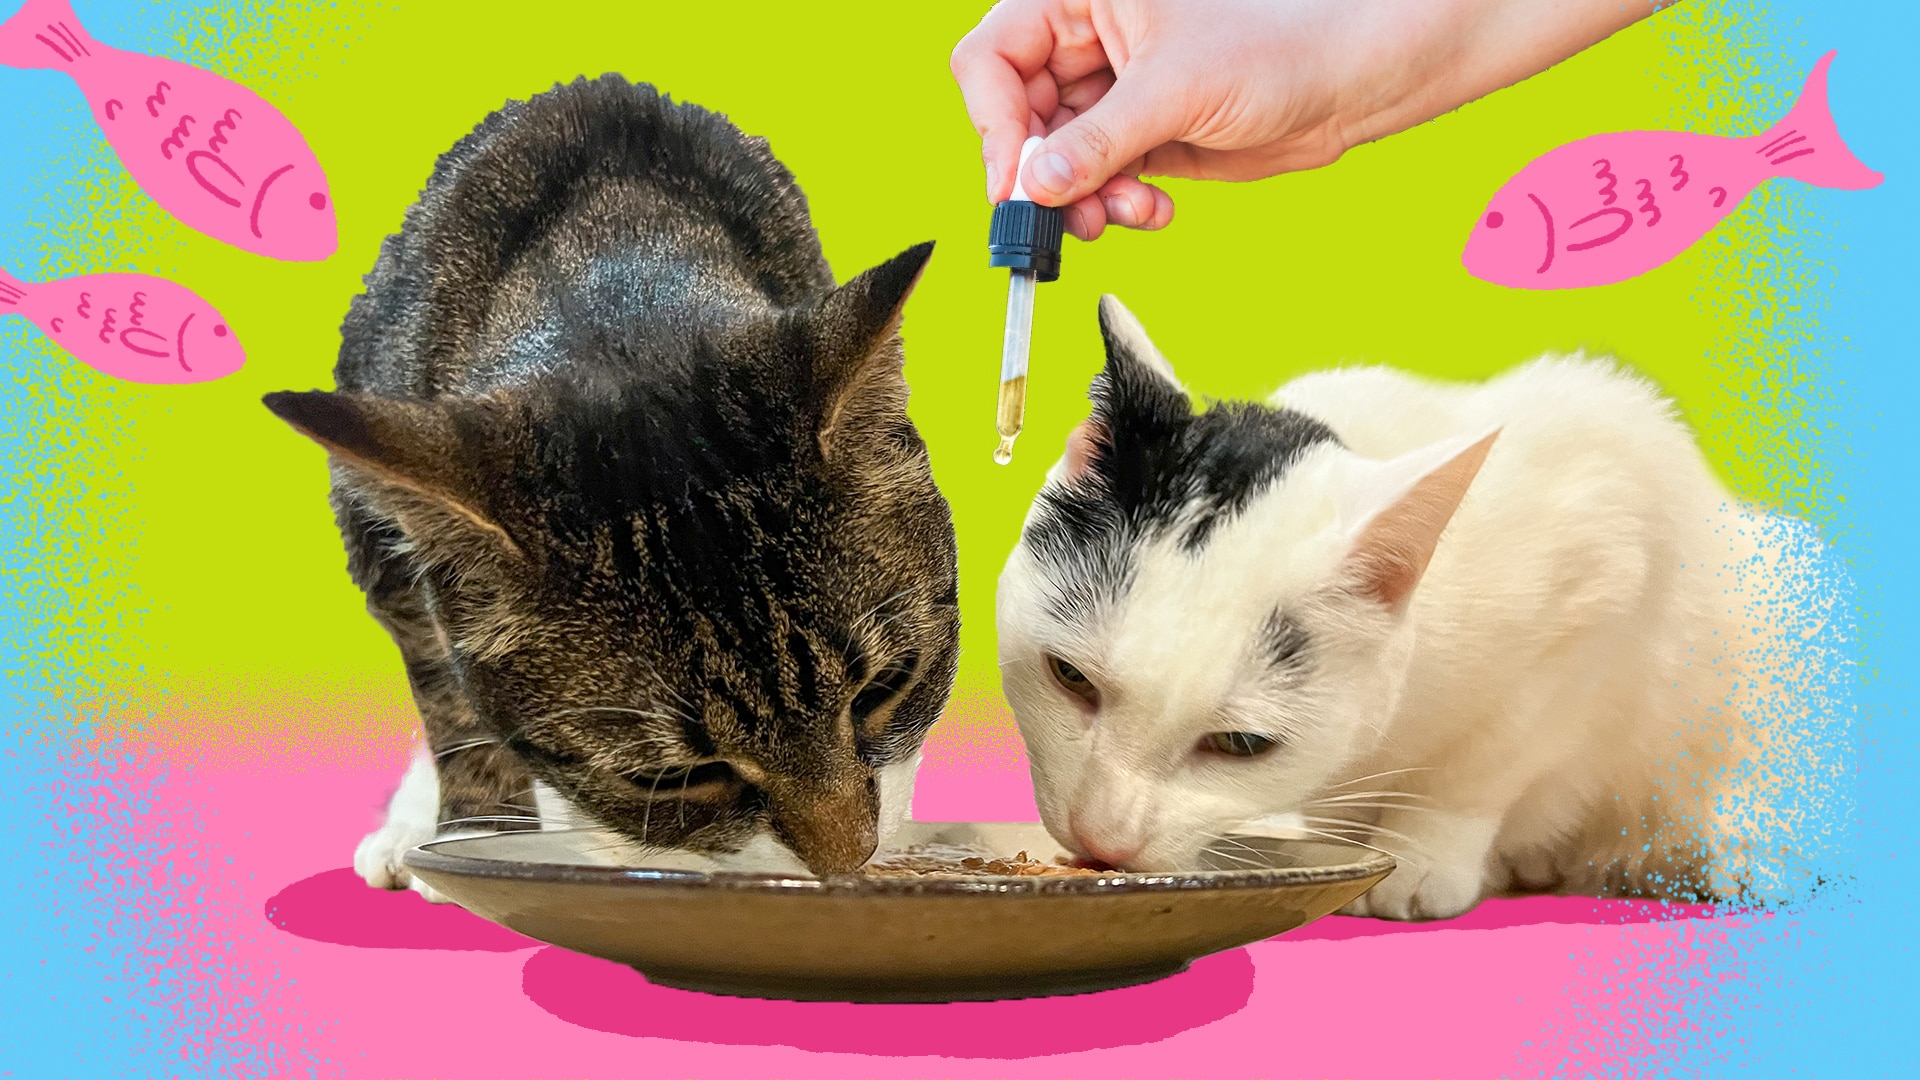 A tabby cat and a black and white cat sharing a bowl of food with a bright graphic pink, blue and yellow background.